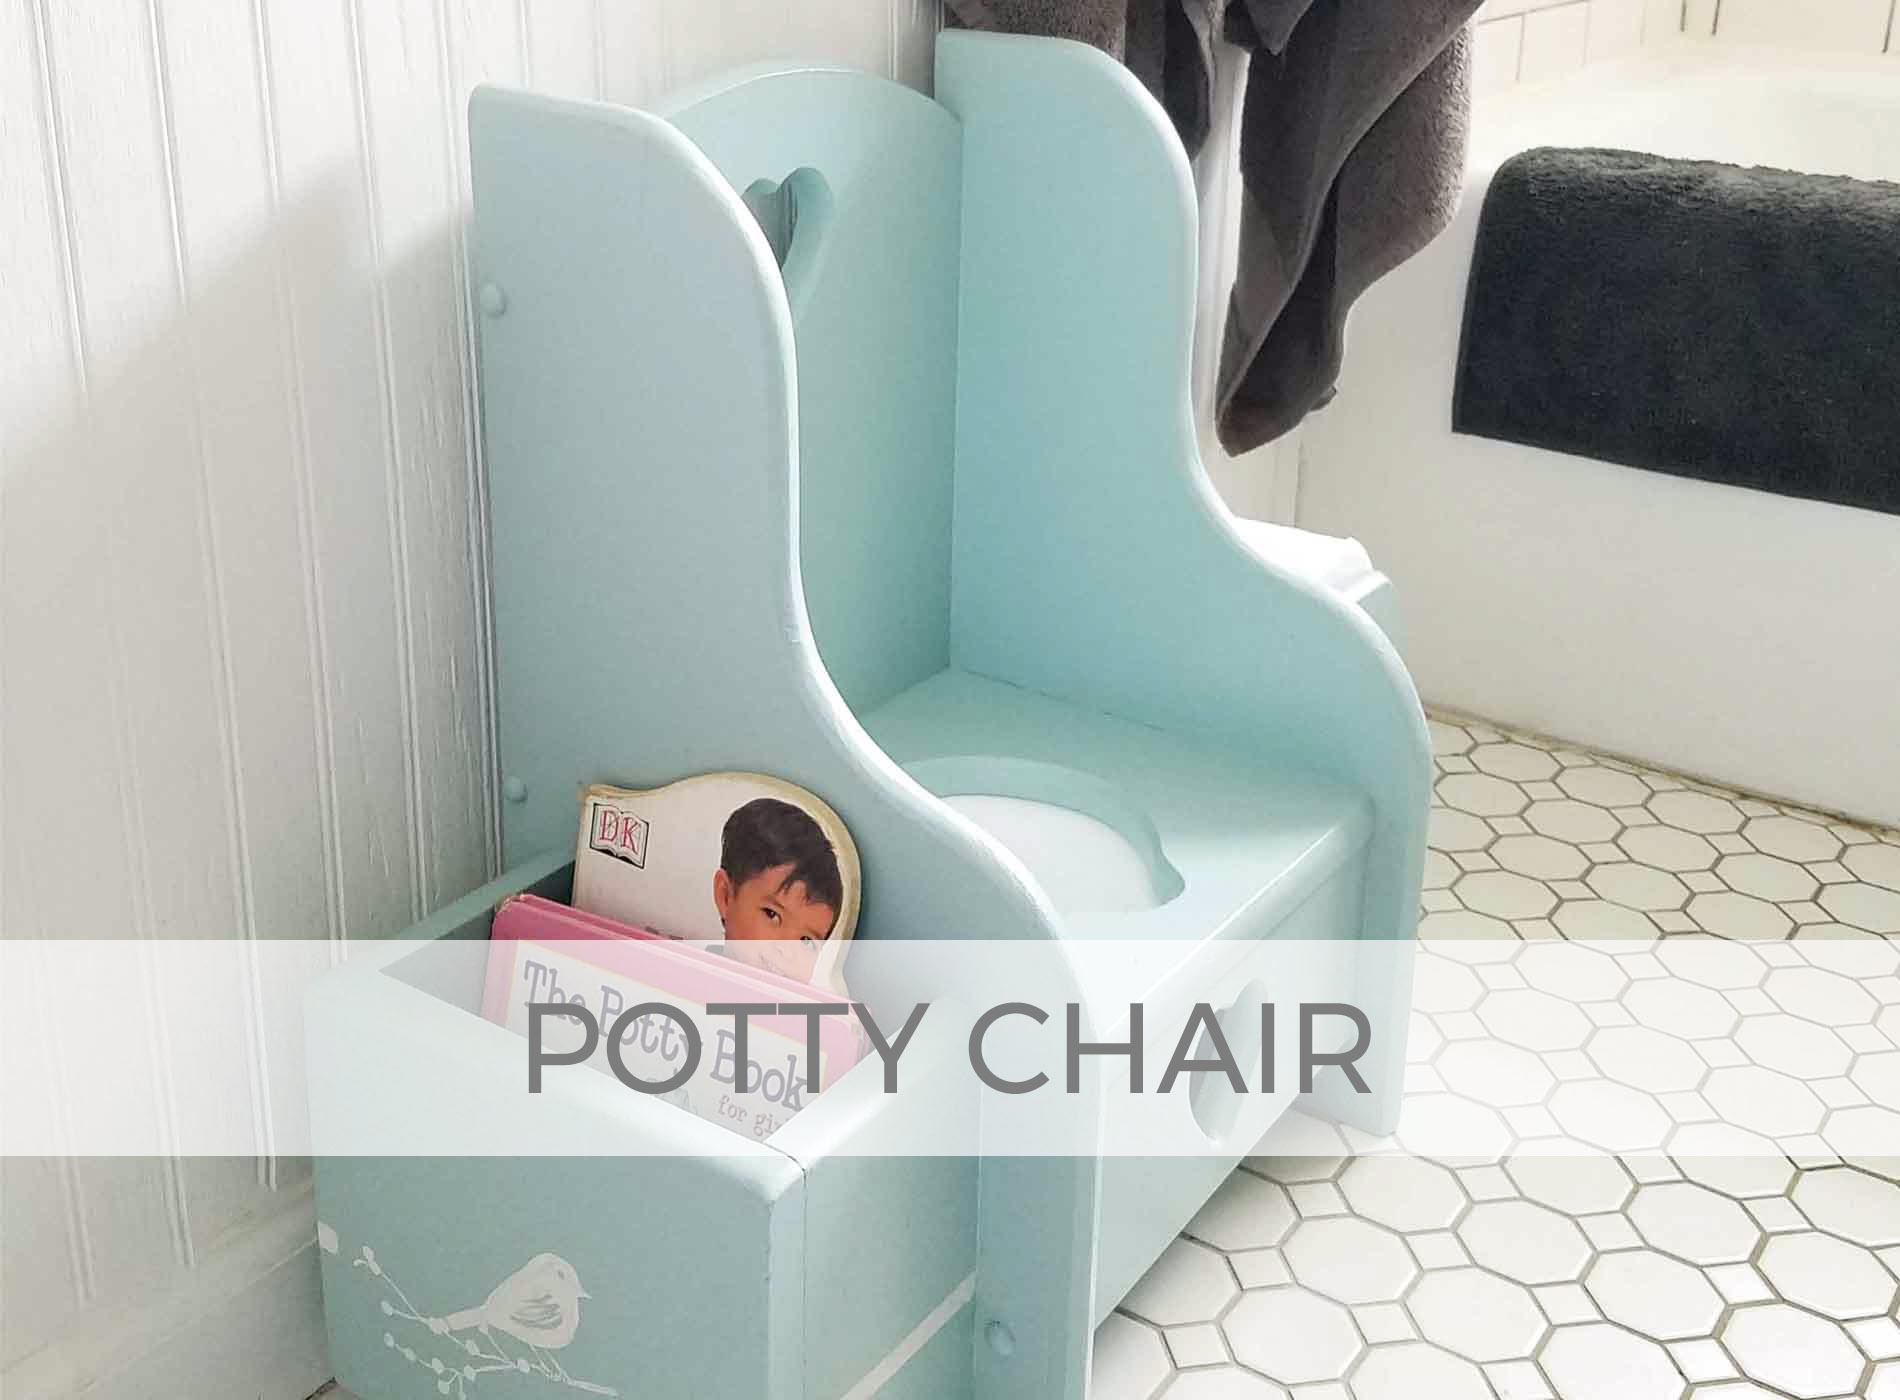 Child's Potty Chair Makeover by Larissa of Prodigal Pieces | prodigalpieces.com #prodigalpieces